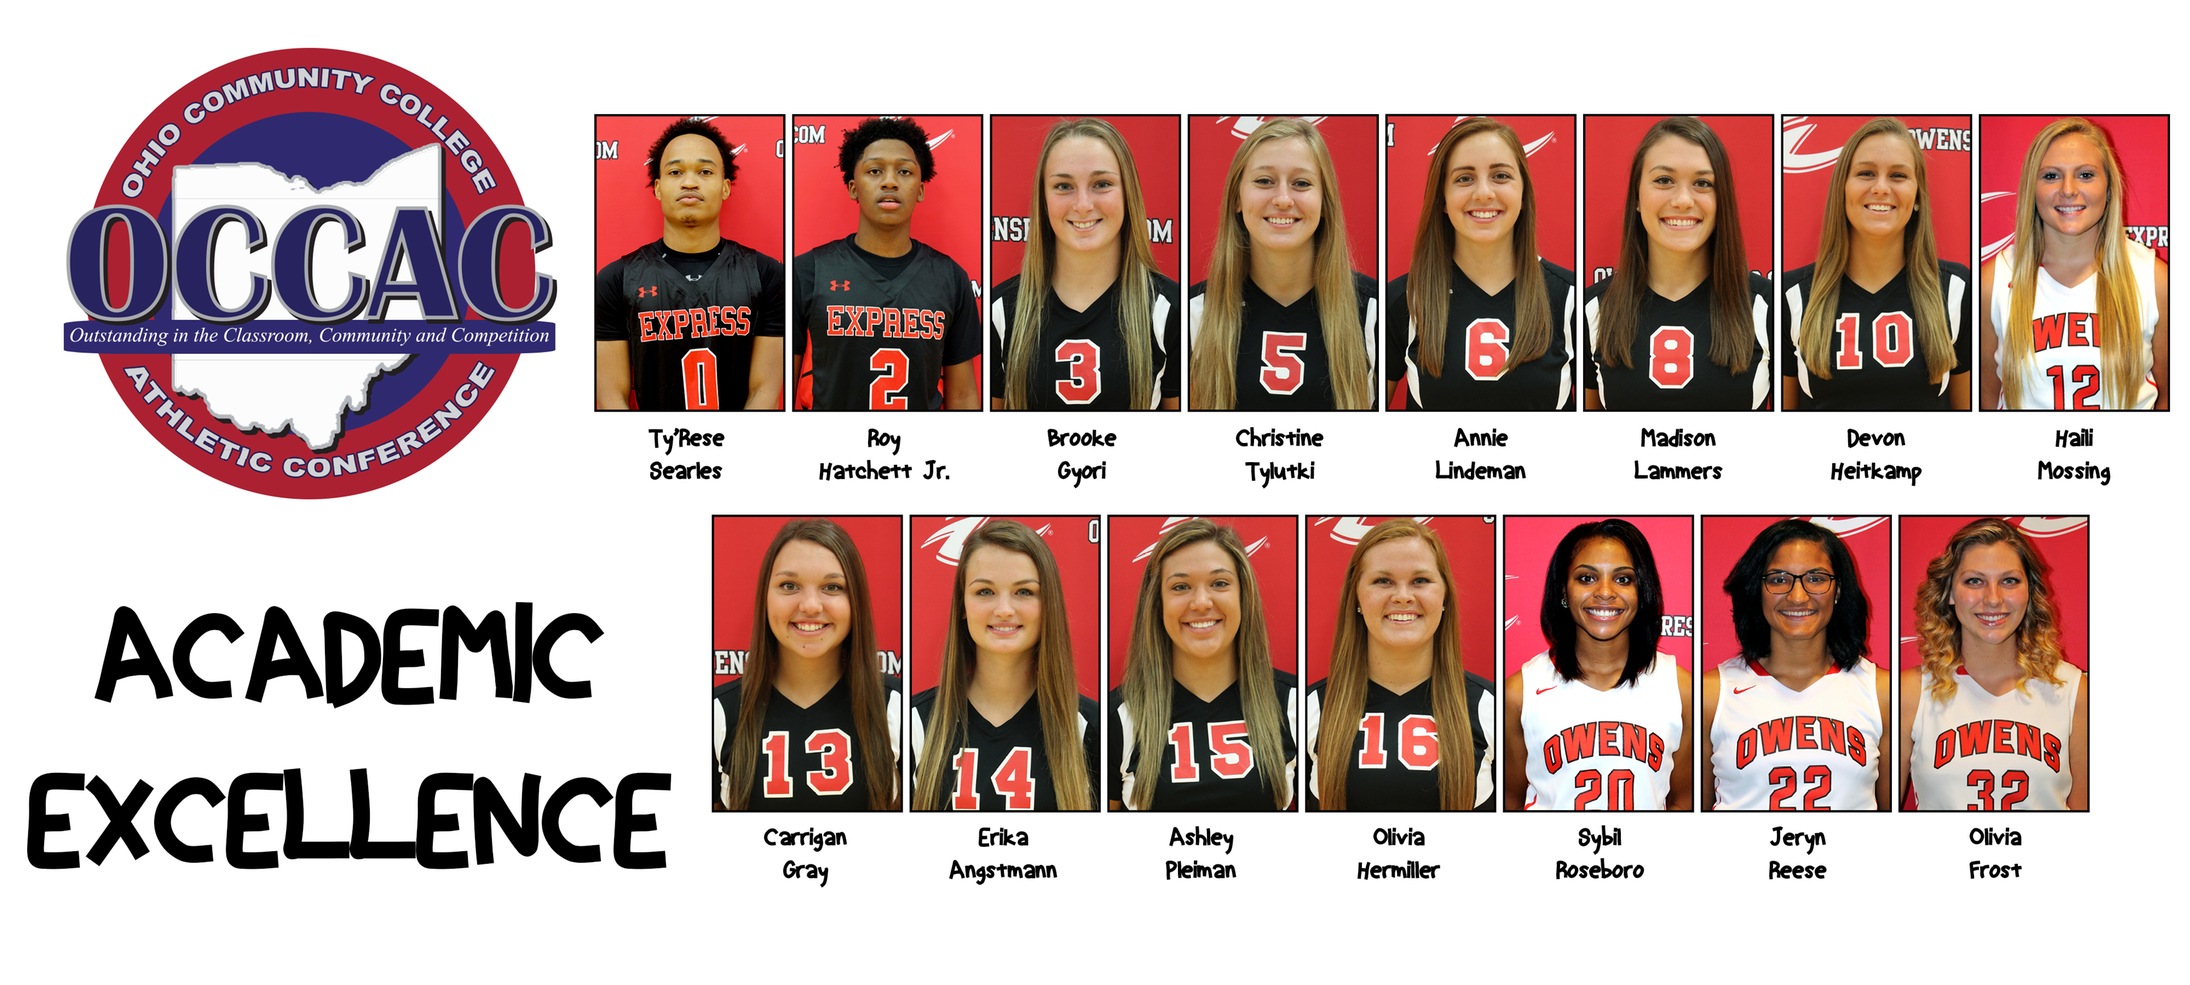 15 Owens Student-Athletes Land Spot On OCCAC's Spring All-Academic Team